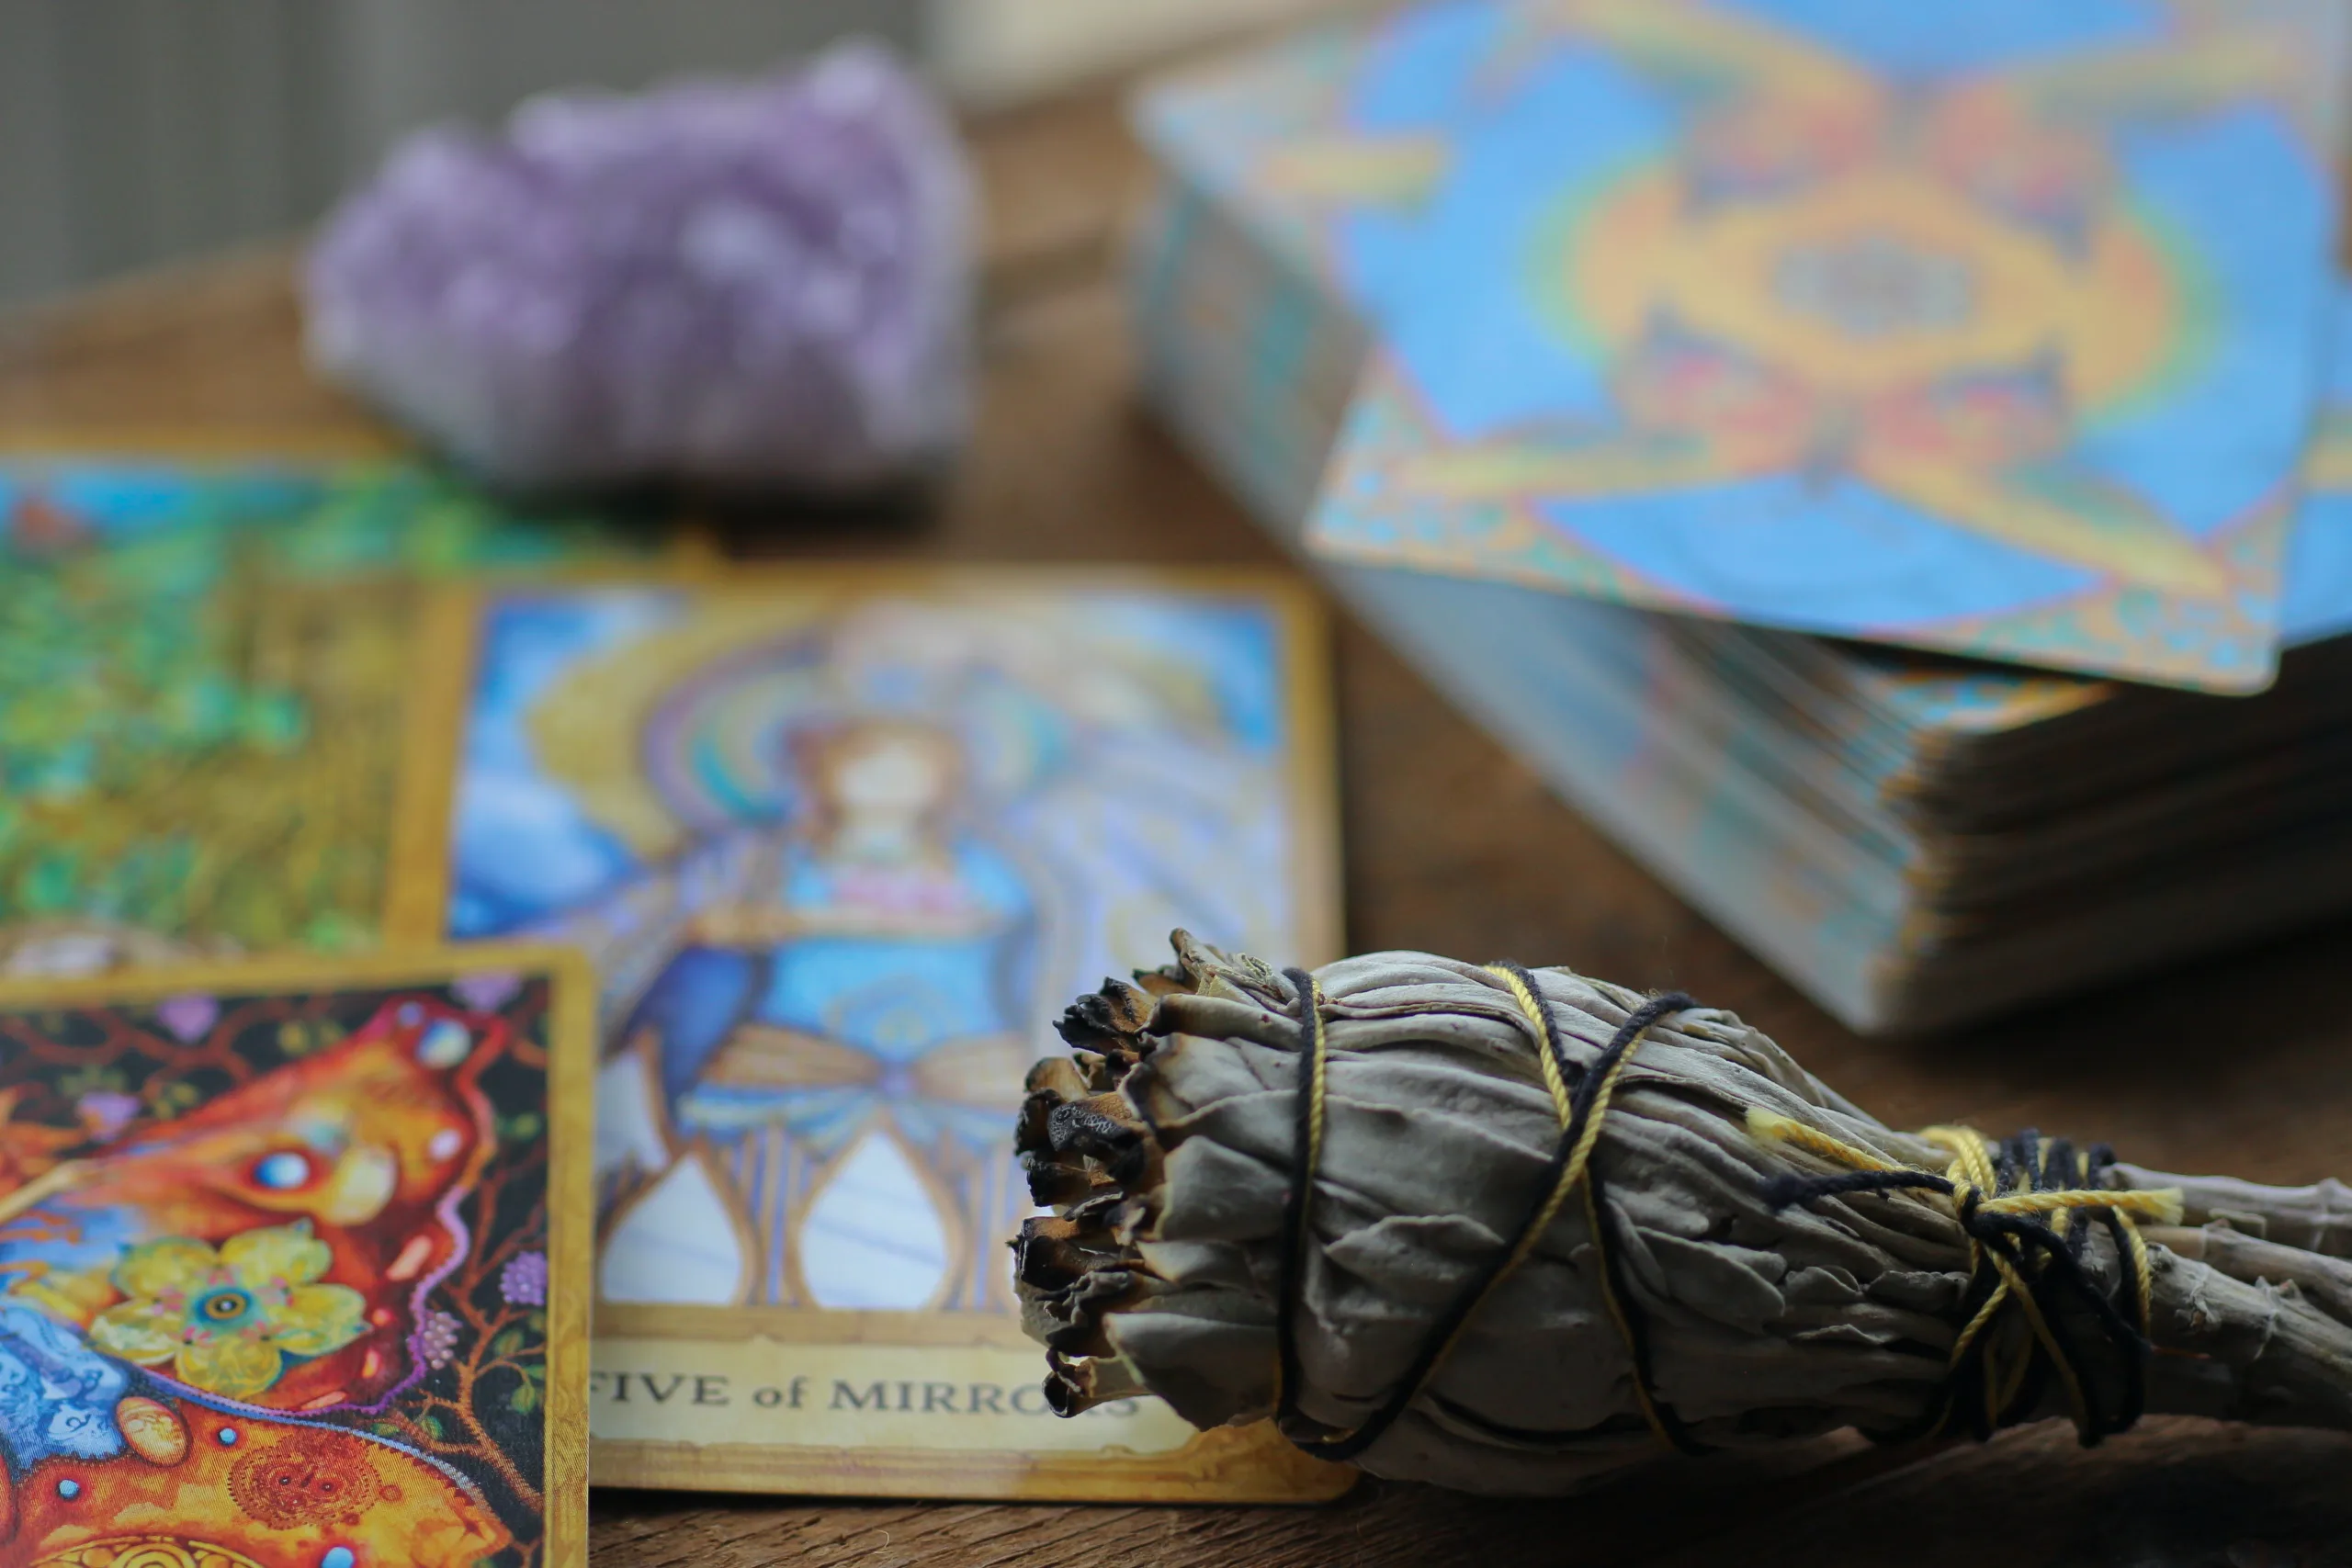 What tarot card is associated with libra?